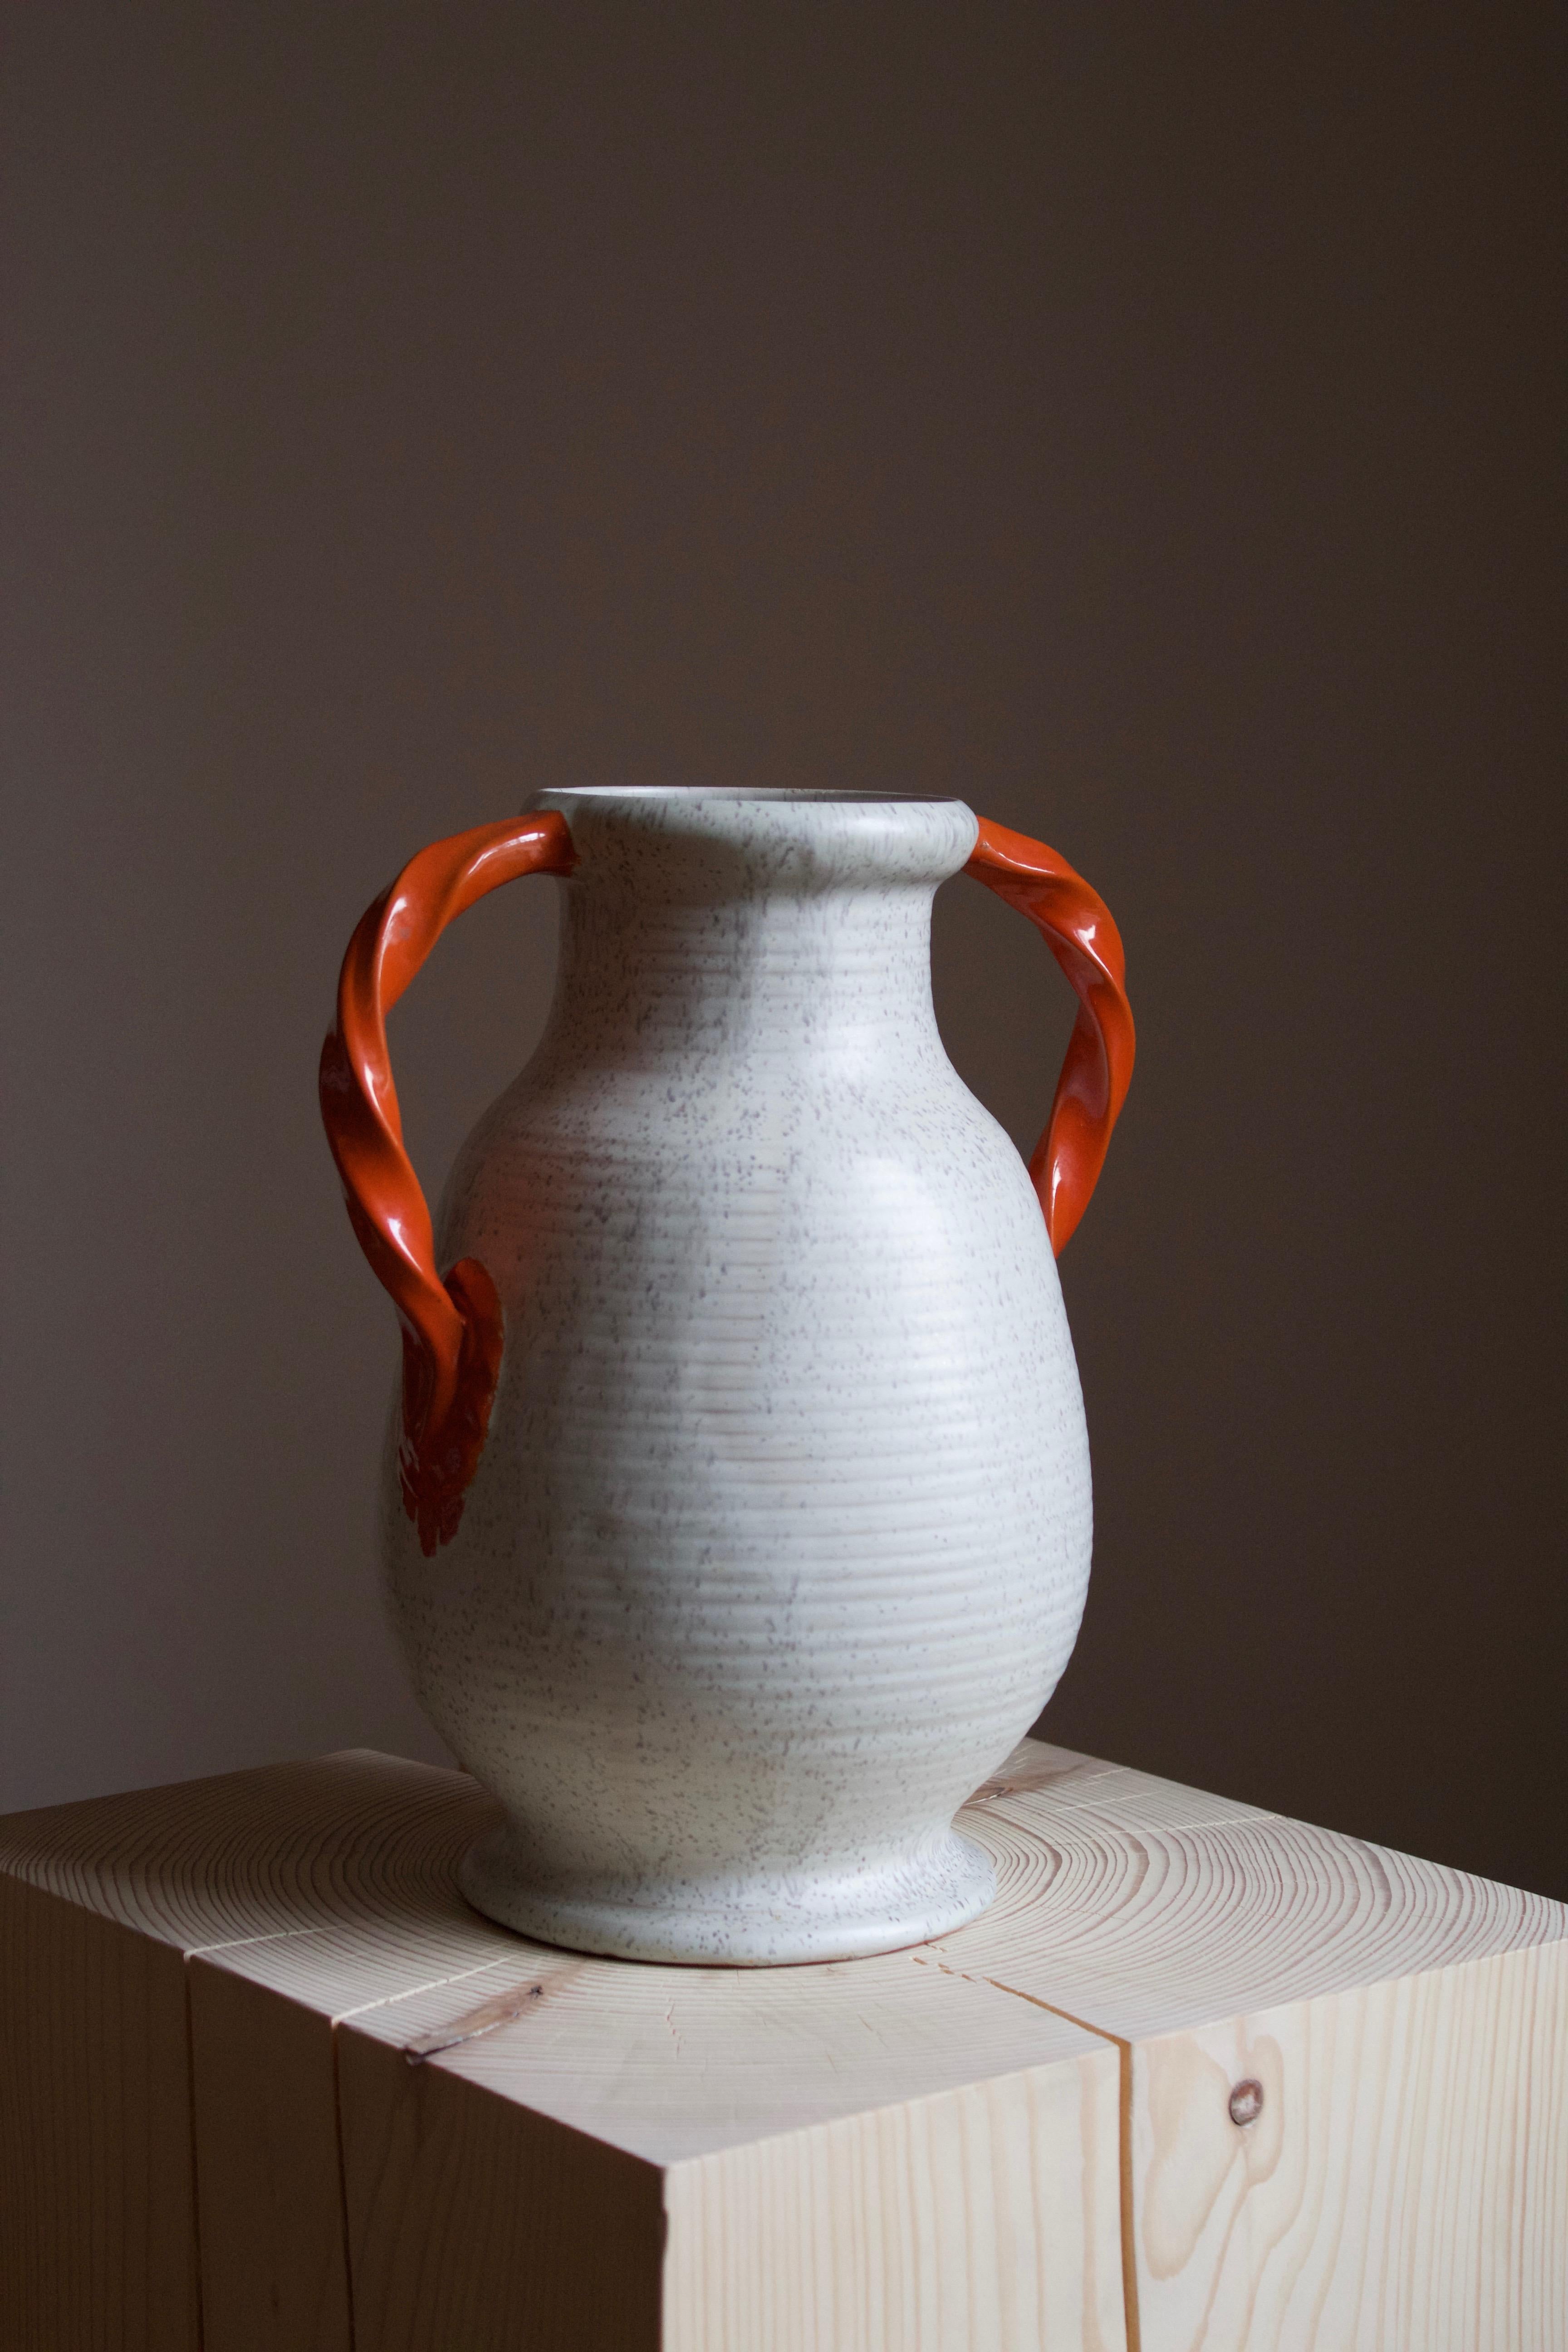 An early modernist vase. Produced by Upsala-Ekeby, Sweden, 1930s.


Other designers of the period include Ettore Sottsass, Carl Harry Stålhane, Lisa Larsson, Axel Salto, and Arne Bang.